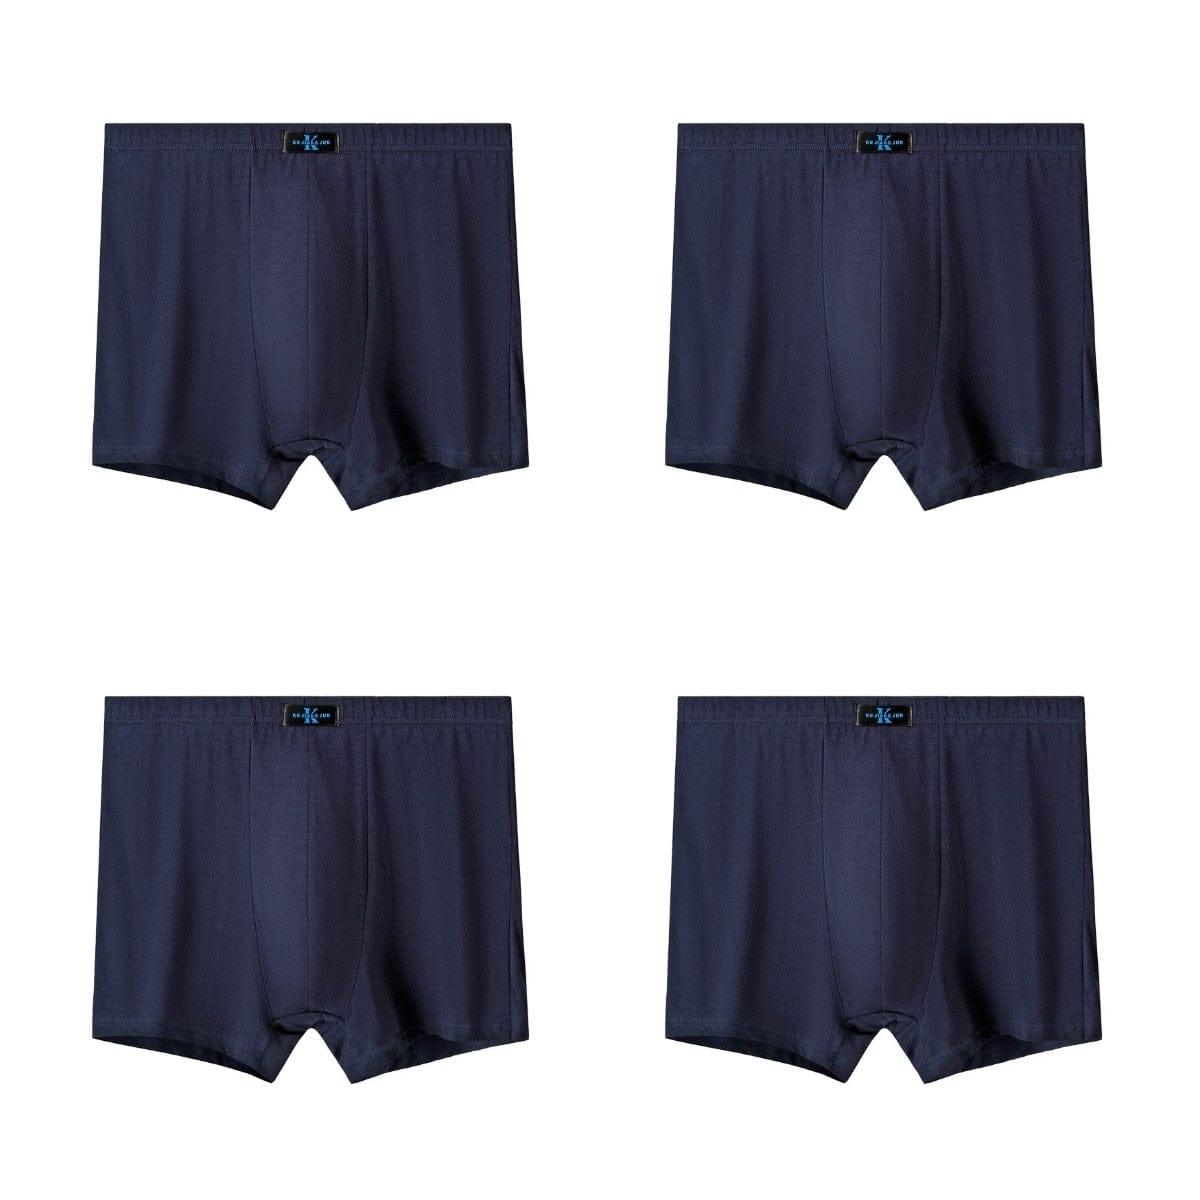 Henry underwear (Plus sizes) - VERSO QUALITY MATERIALS